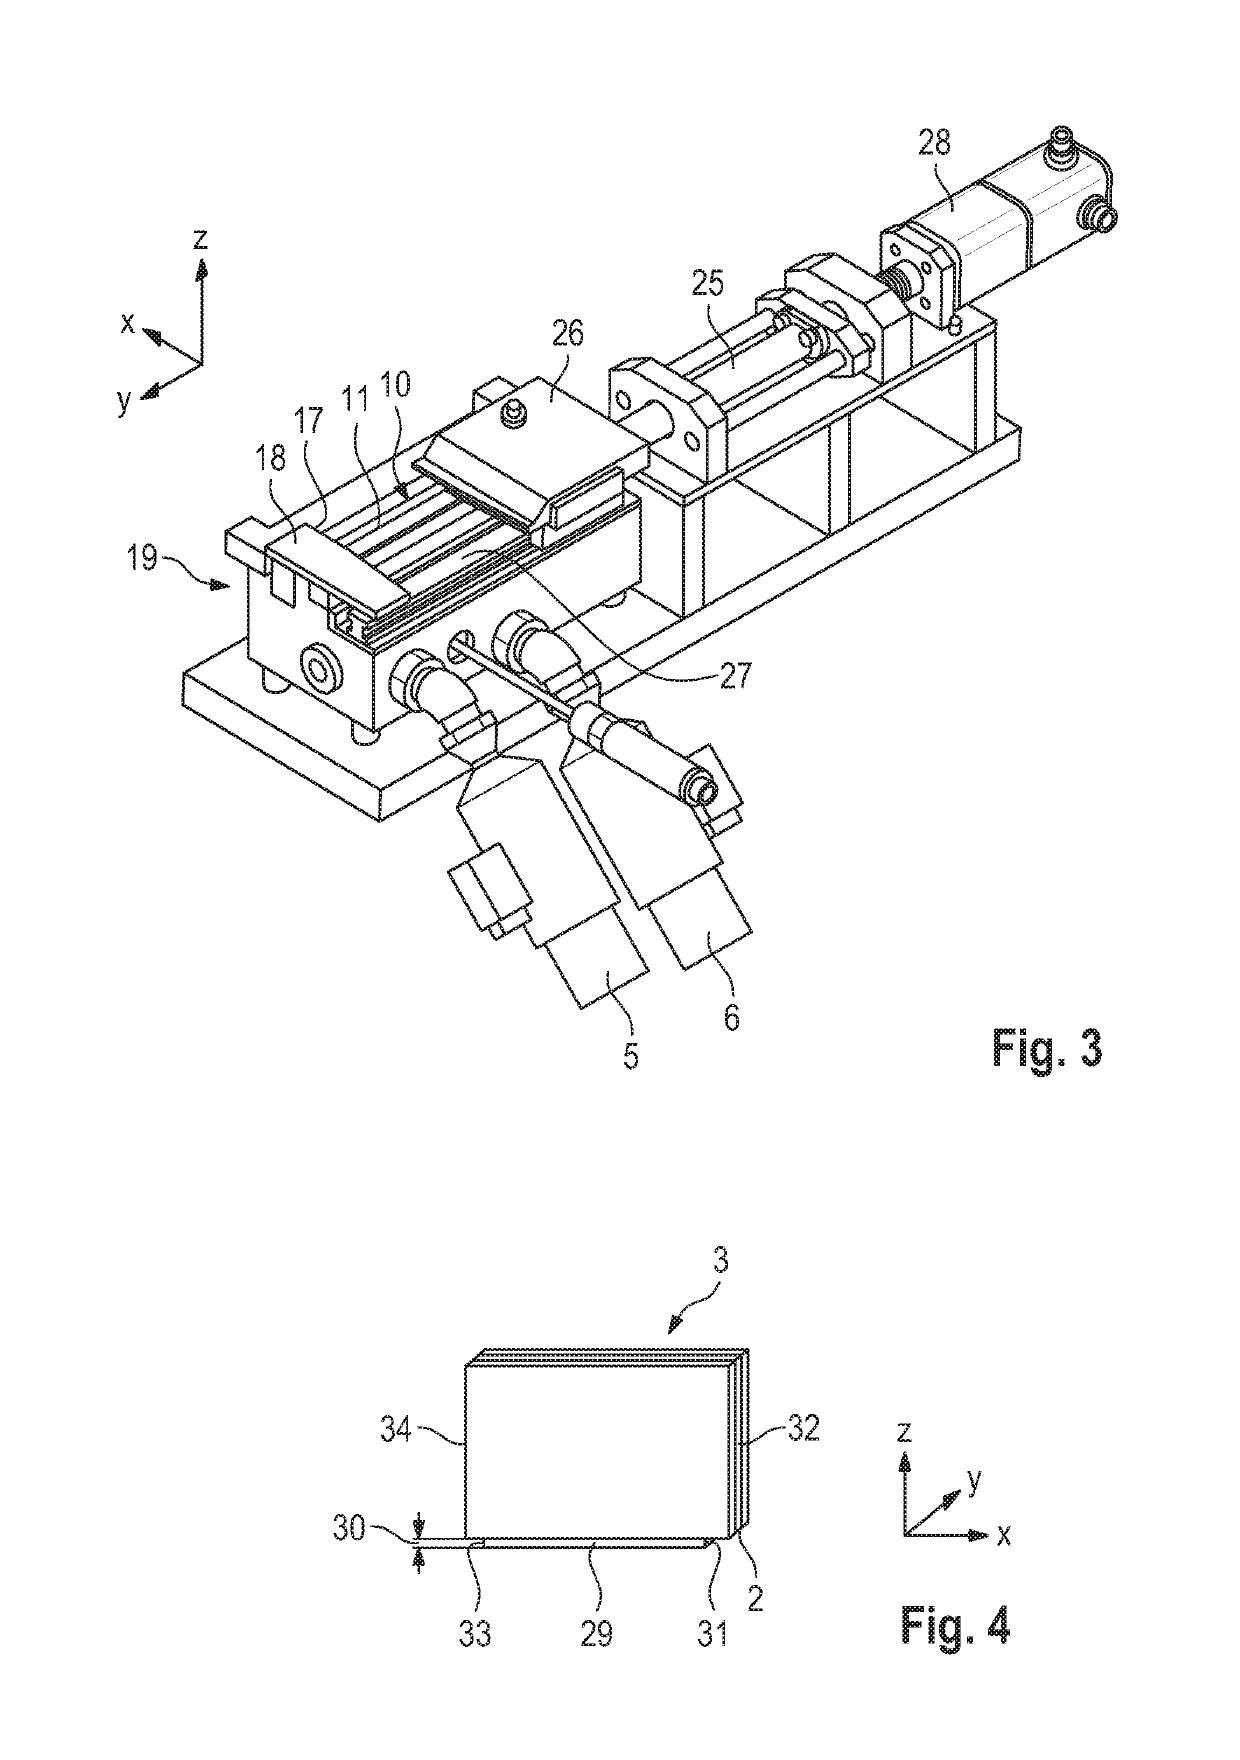 Device For Intermittently Applying A Flowable Substance, And Method For Applying Such A Substance